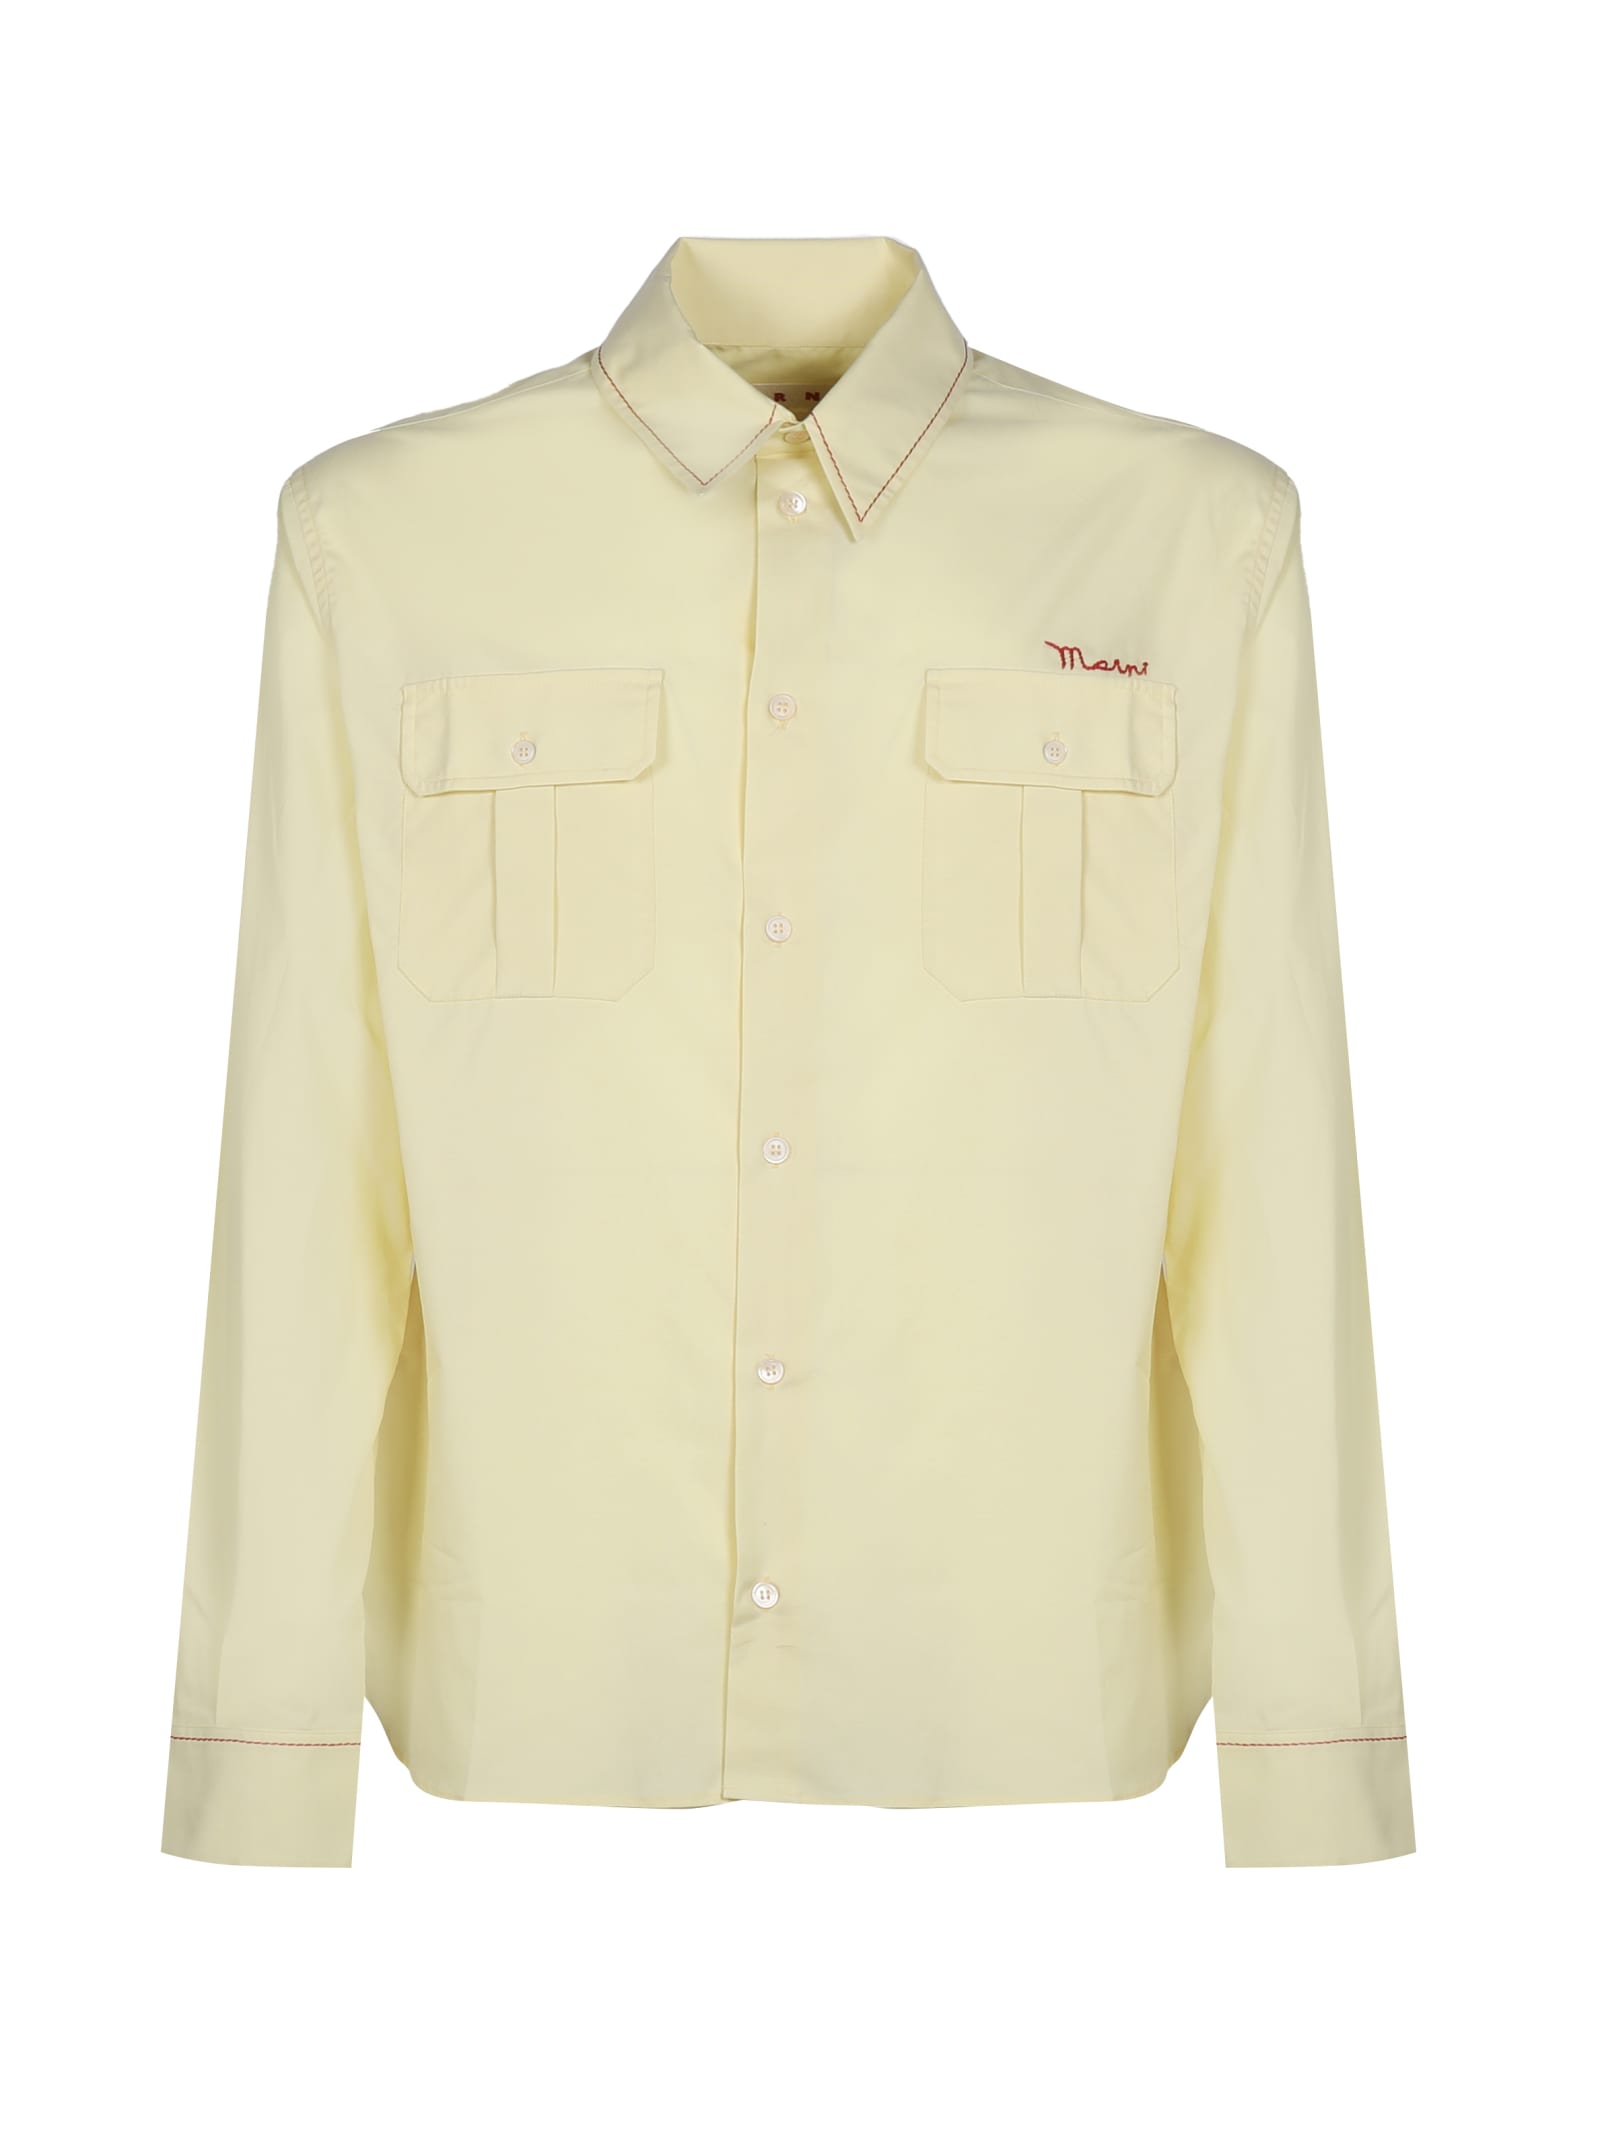 MARNI COTTON SHIRT WITH EMBROIDERY